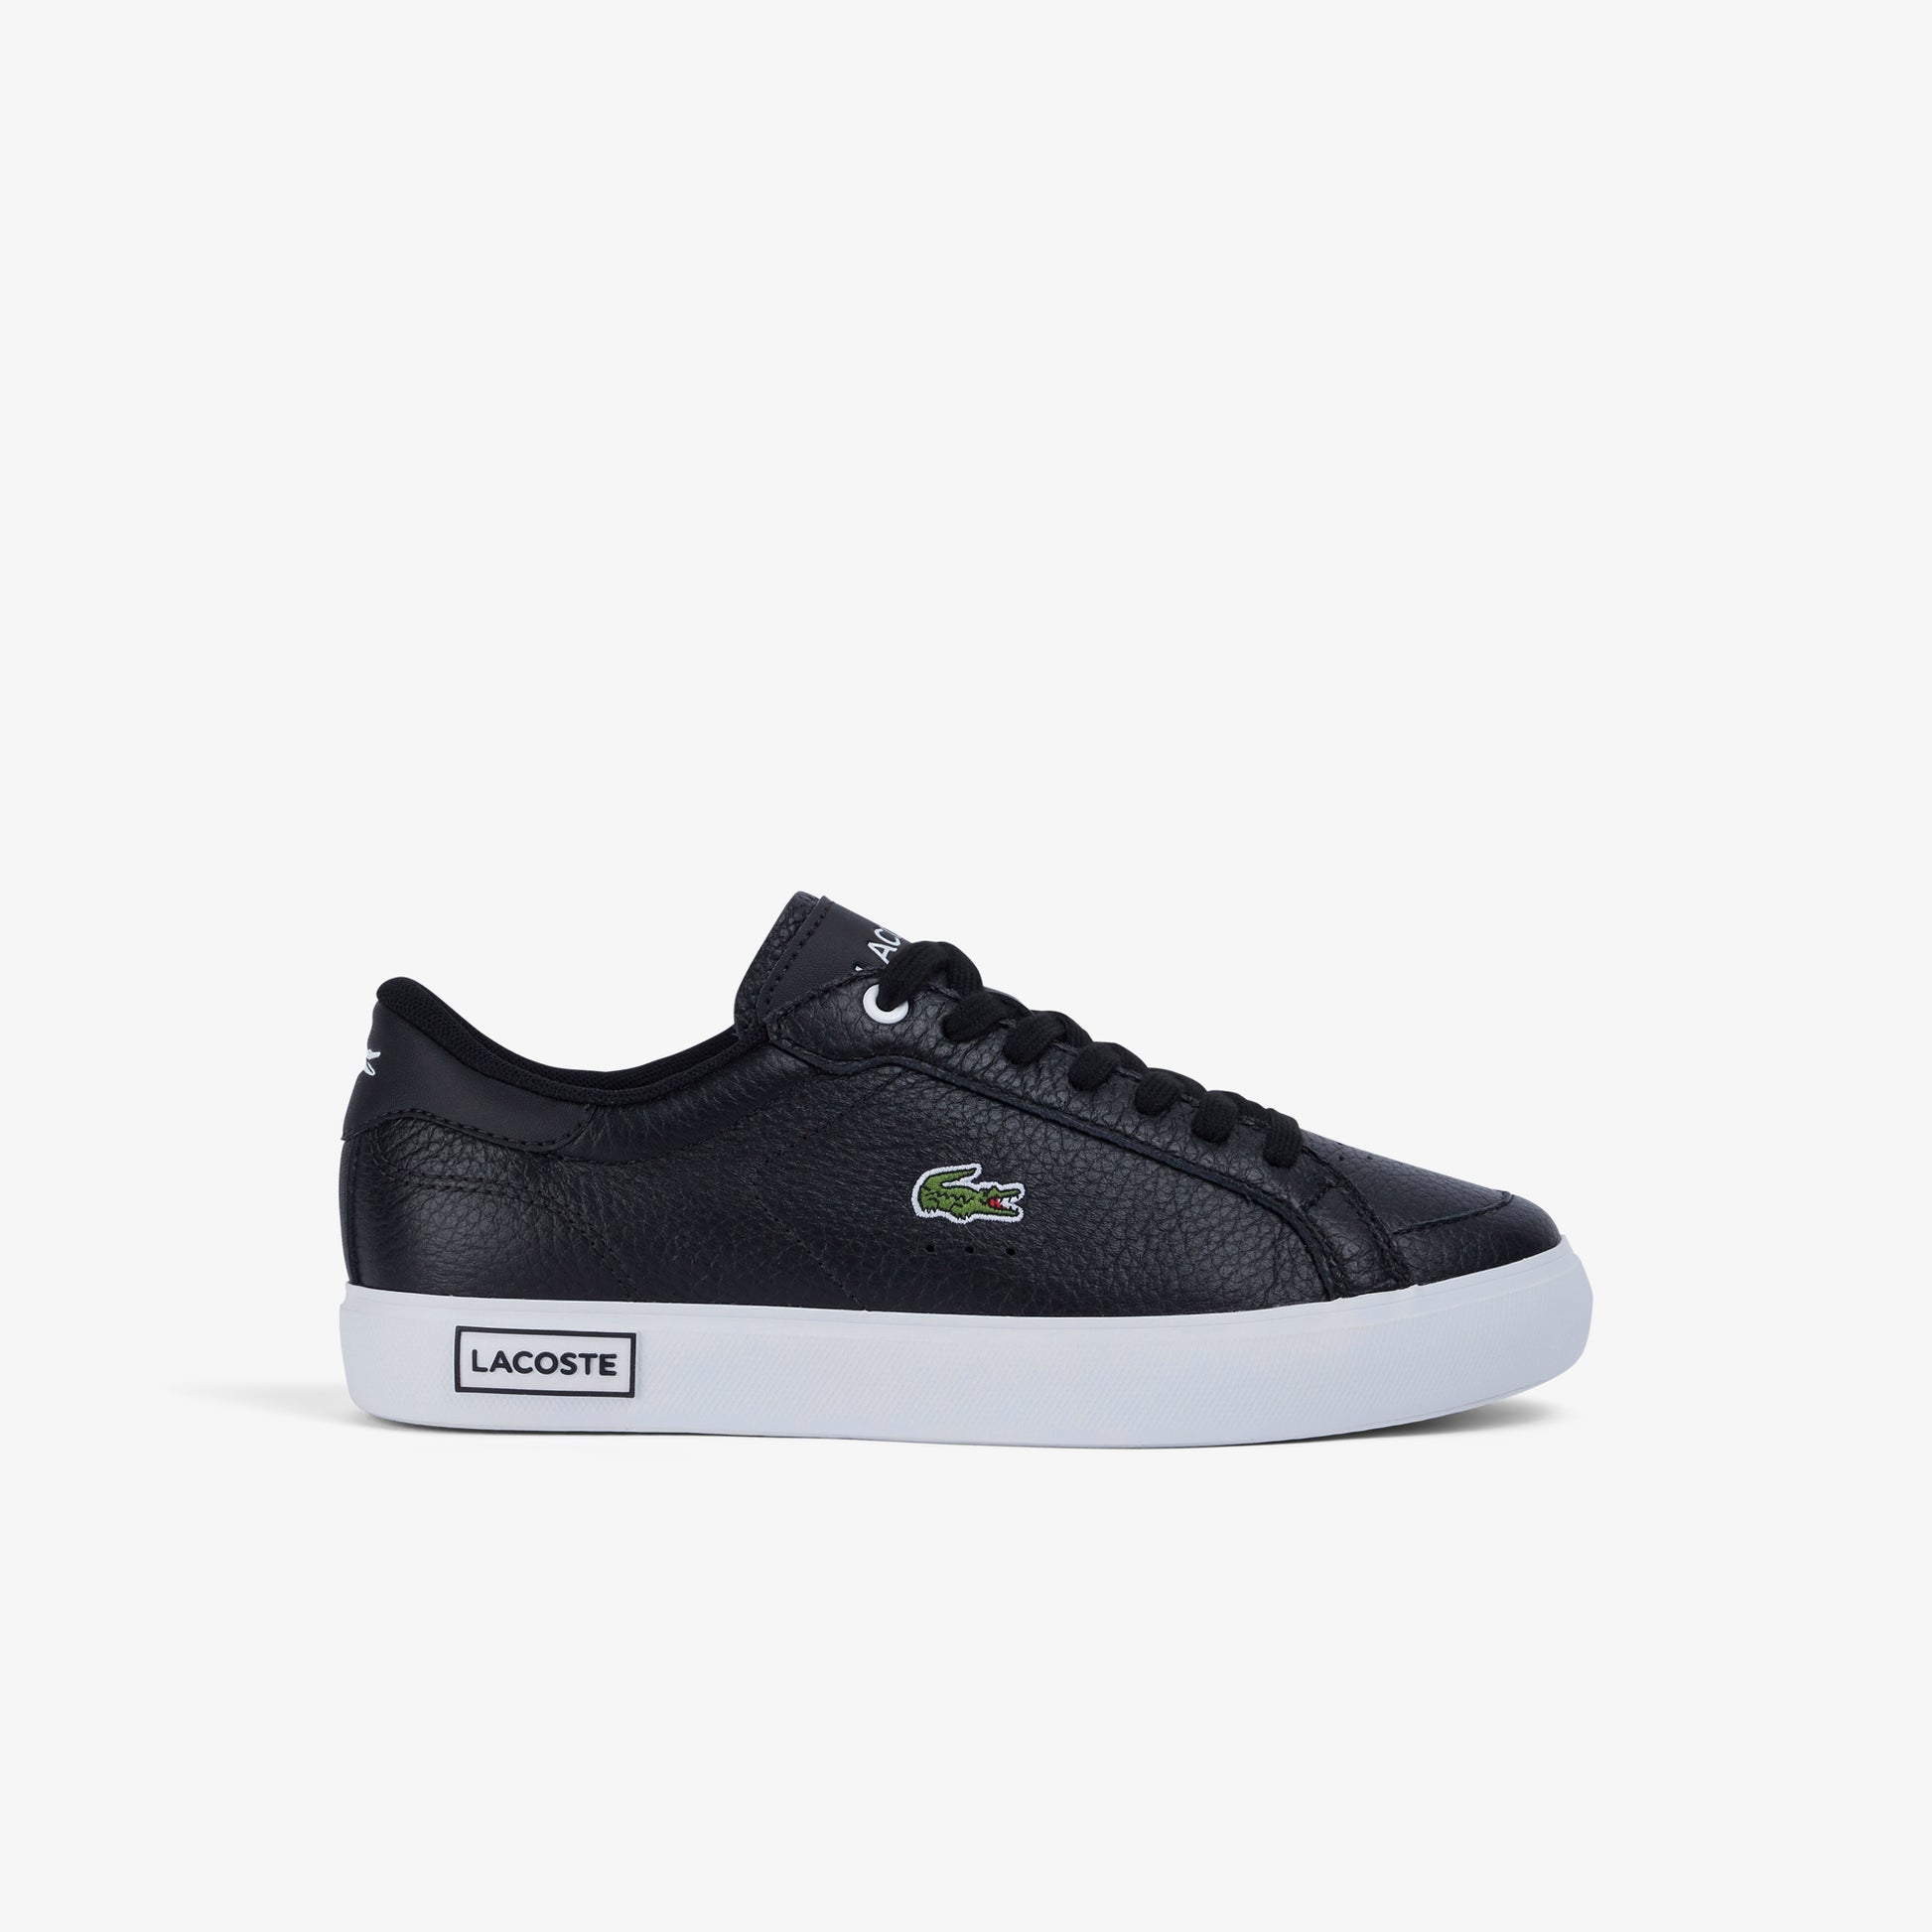 Women's Lacoste Powercourt Leather Considered Detailing Trainers